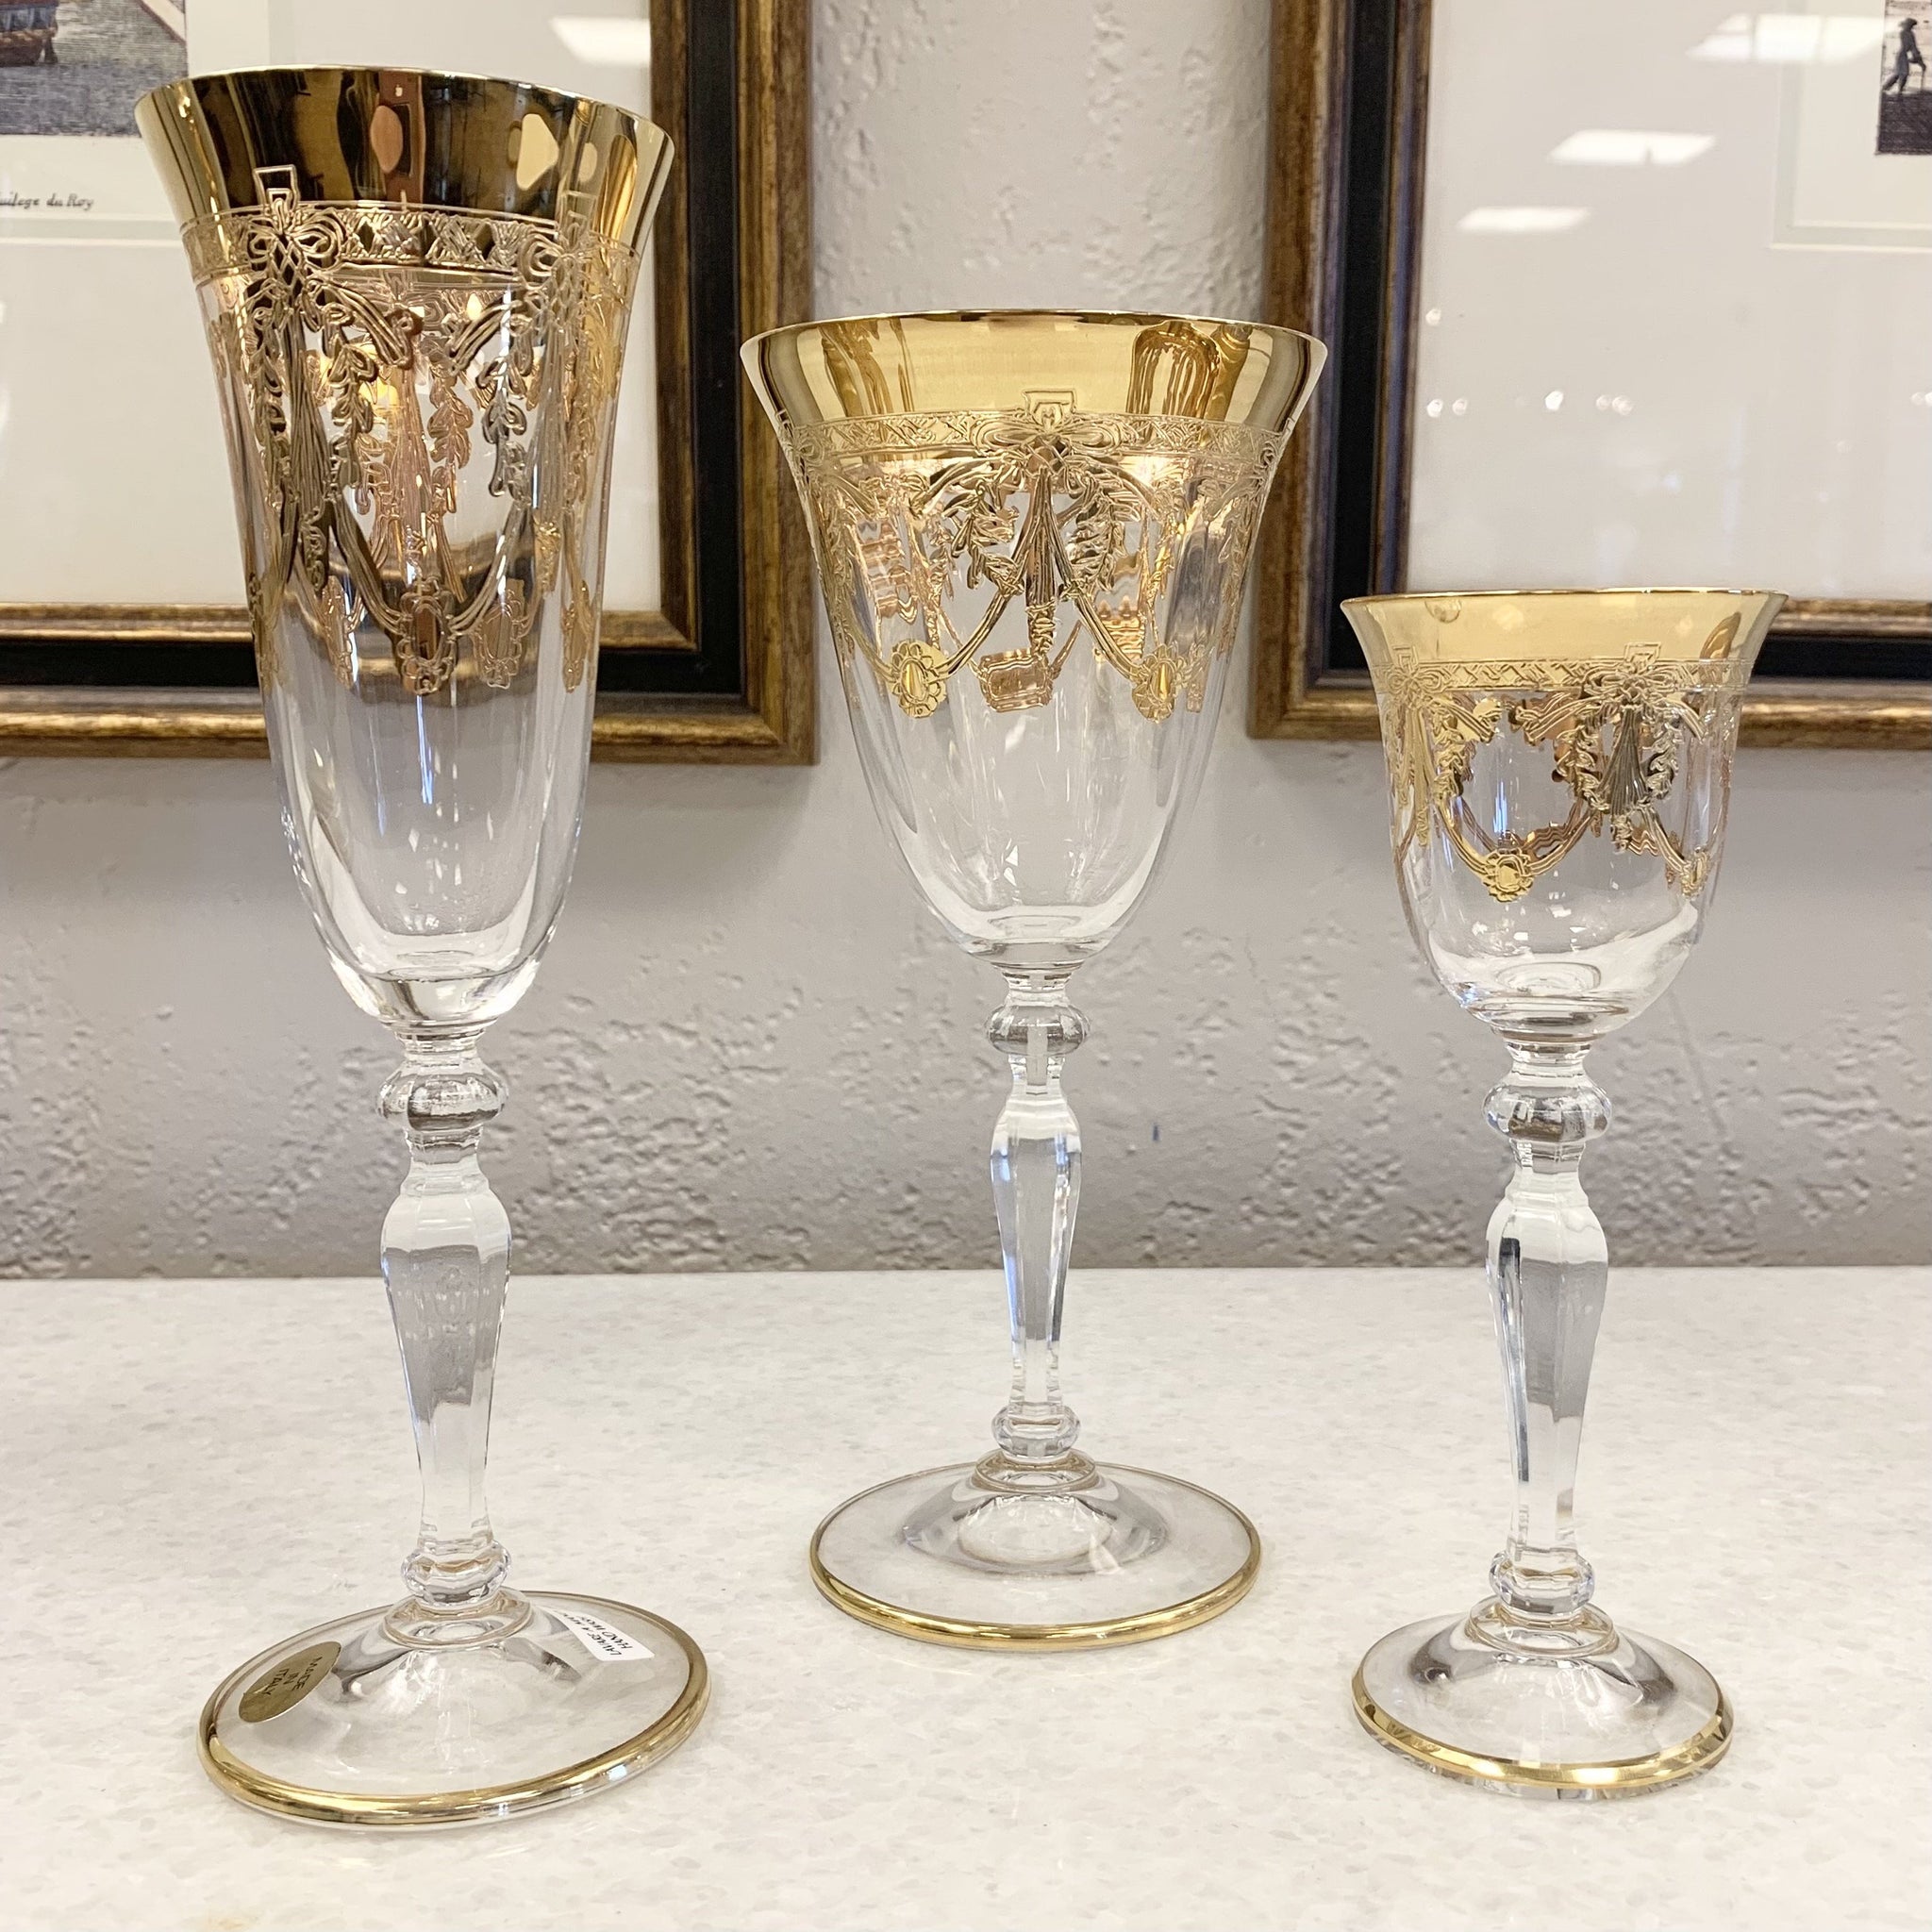 Imported 3 Piece Clear Non-Lead Crystal Stemware Set (Made in Italy)